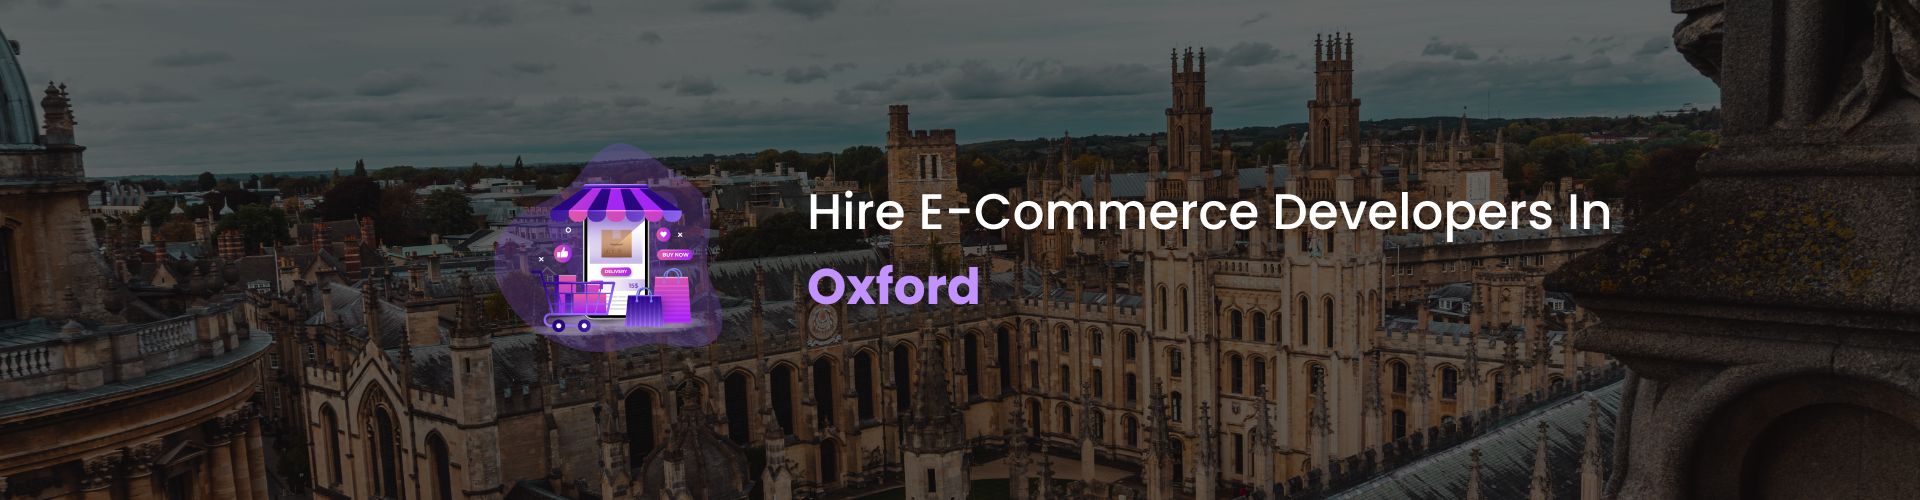 hire ecommerce developers in oxford